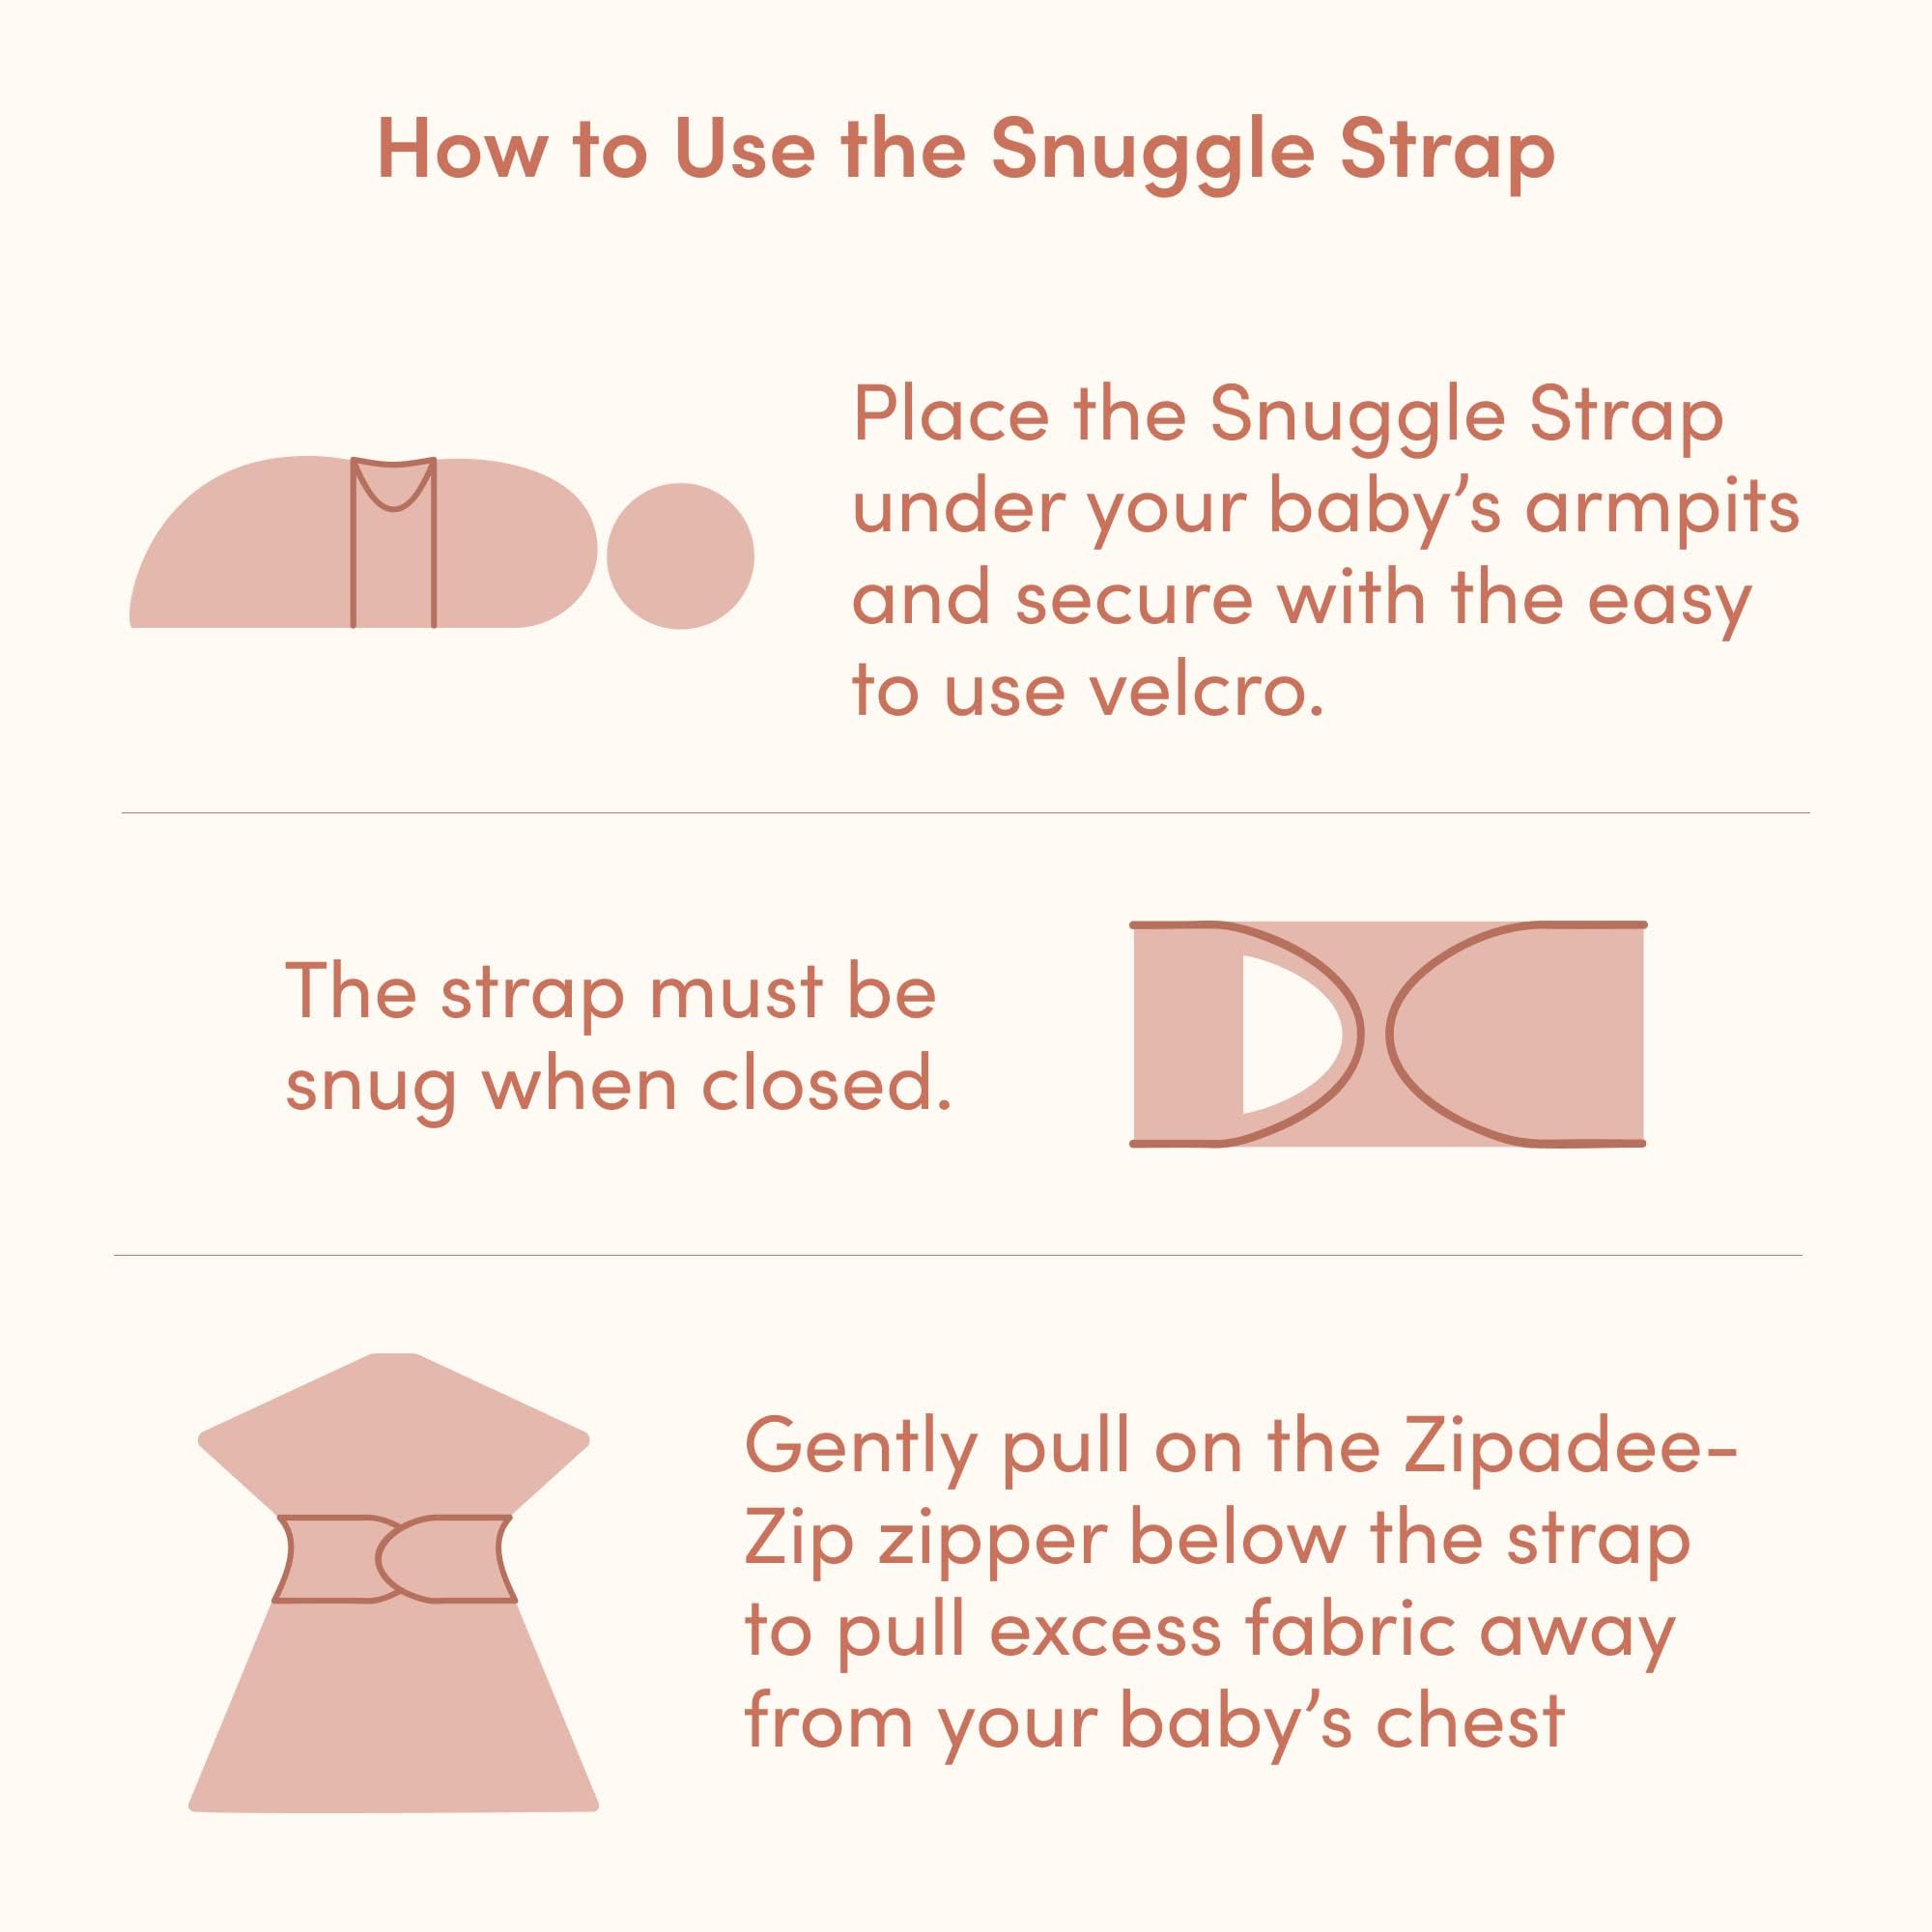 SleepingBaby Zipadee-Zip Transition Swaddle and Snuggle Strap Bundle - Baby Swaddling Blanket with Zipper - Wearable Blanket - Goodnight Moon, Small (4-8 Month)